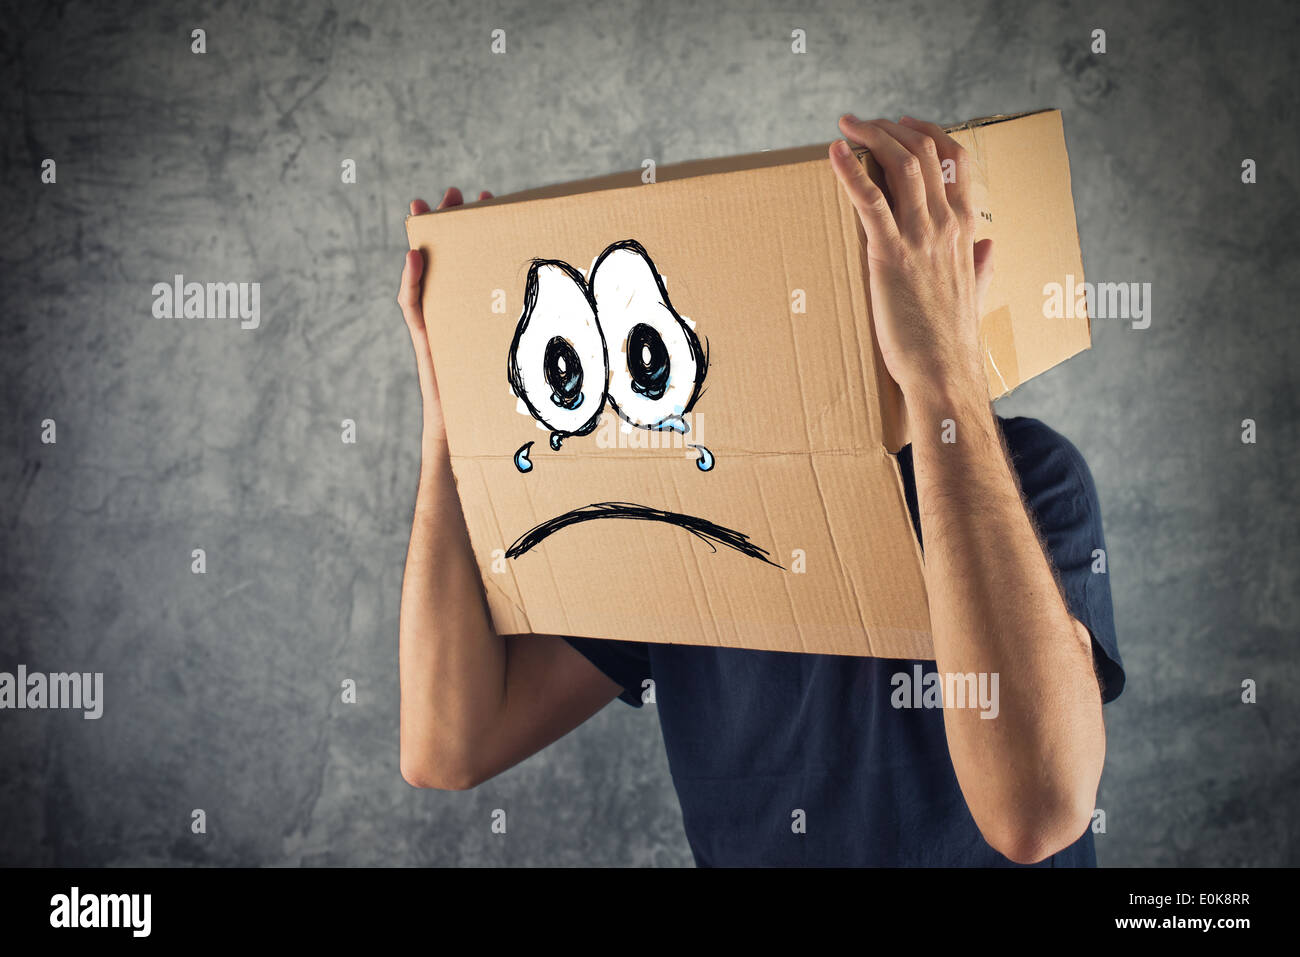 Man with cardboard box on his head and sad crying face expression. Concept of sadness and depression. Stock Photo